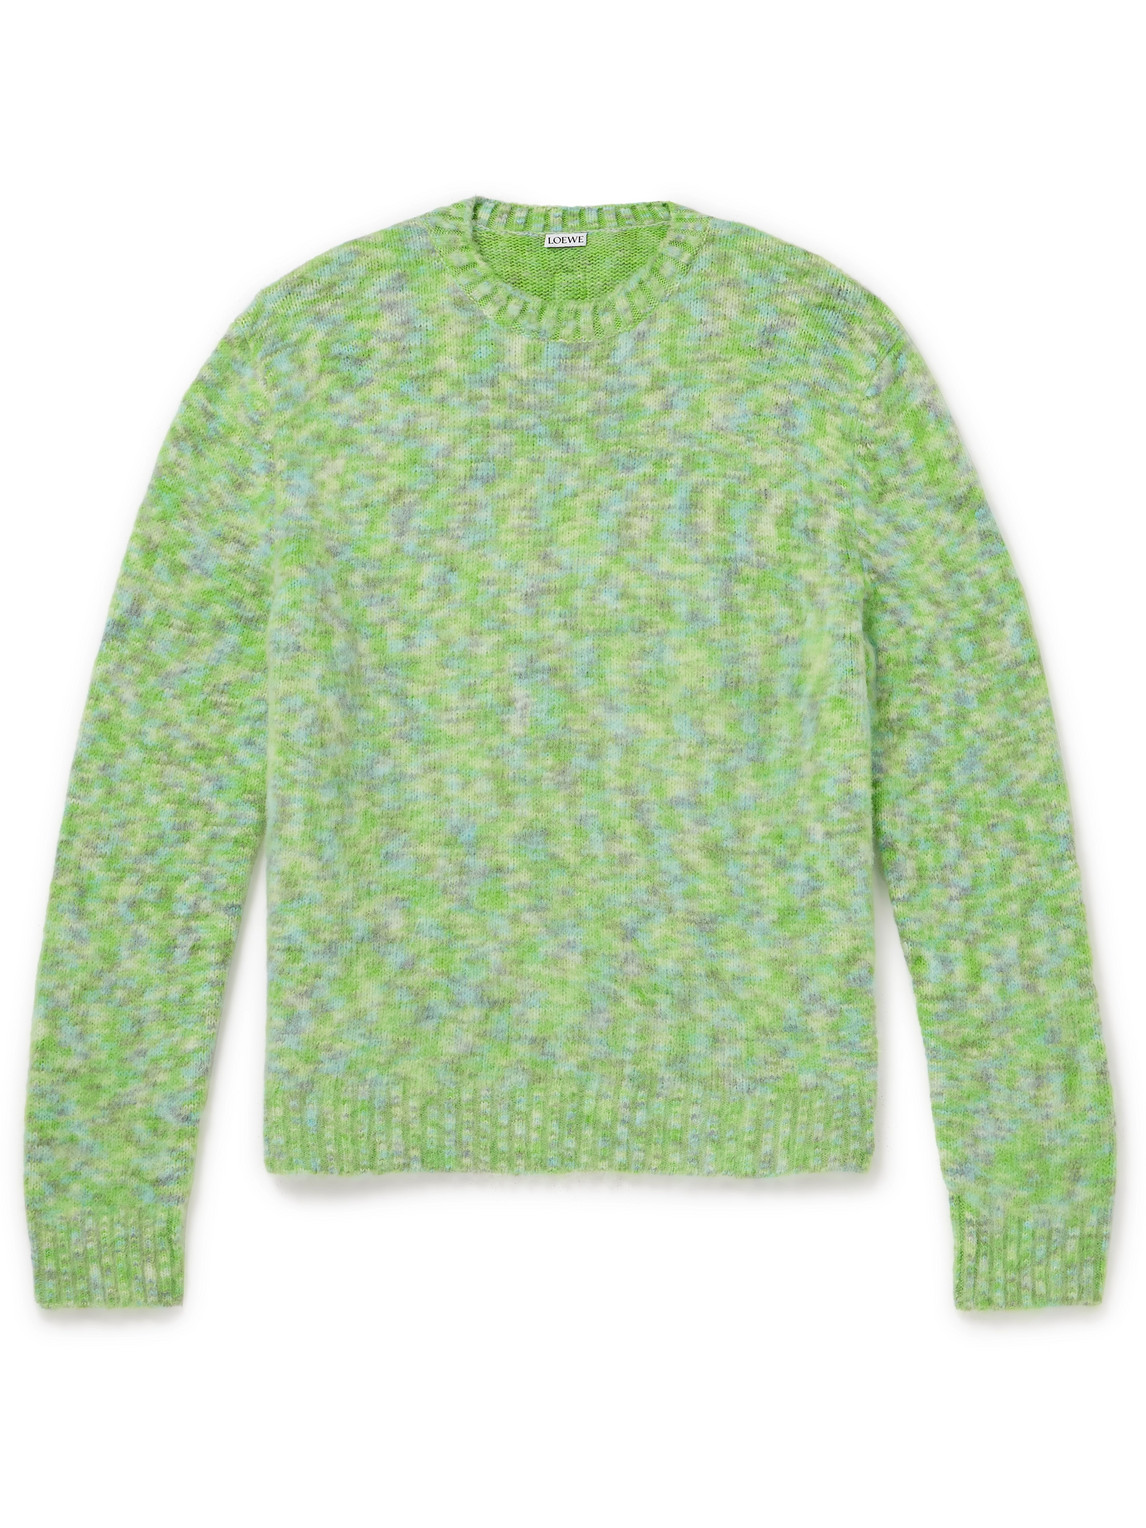 Loewe Brushed Knitted Sweater In Green